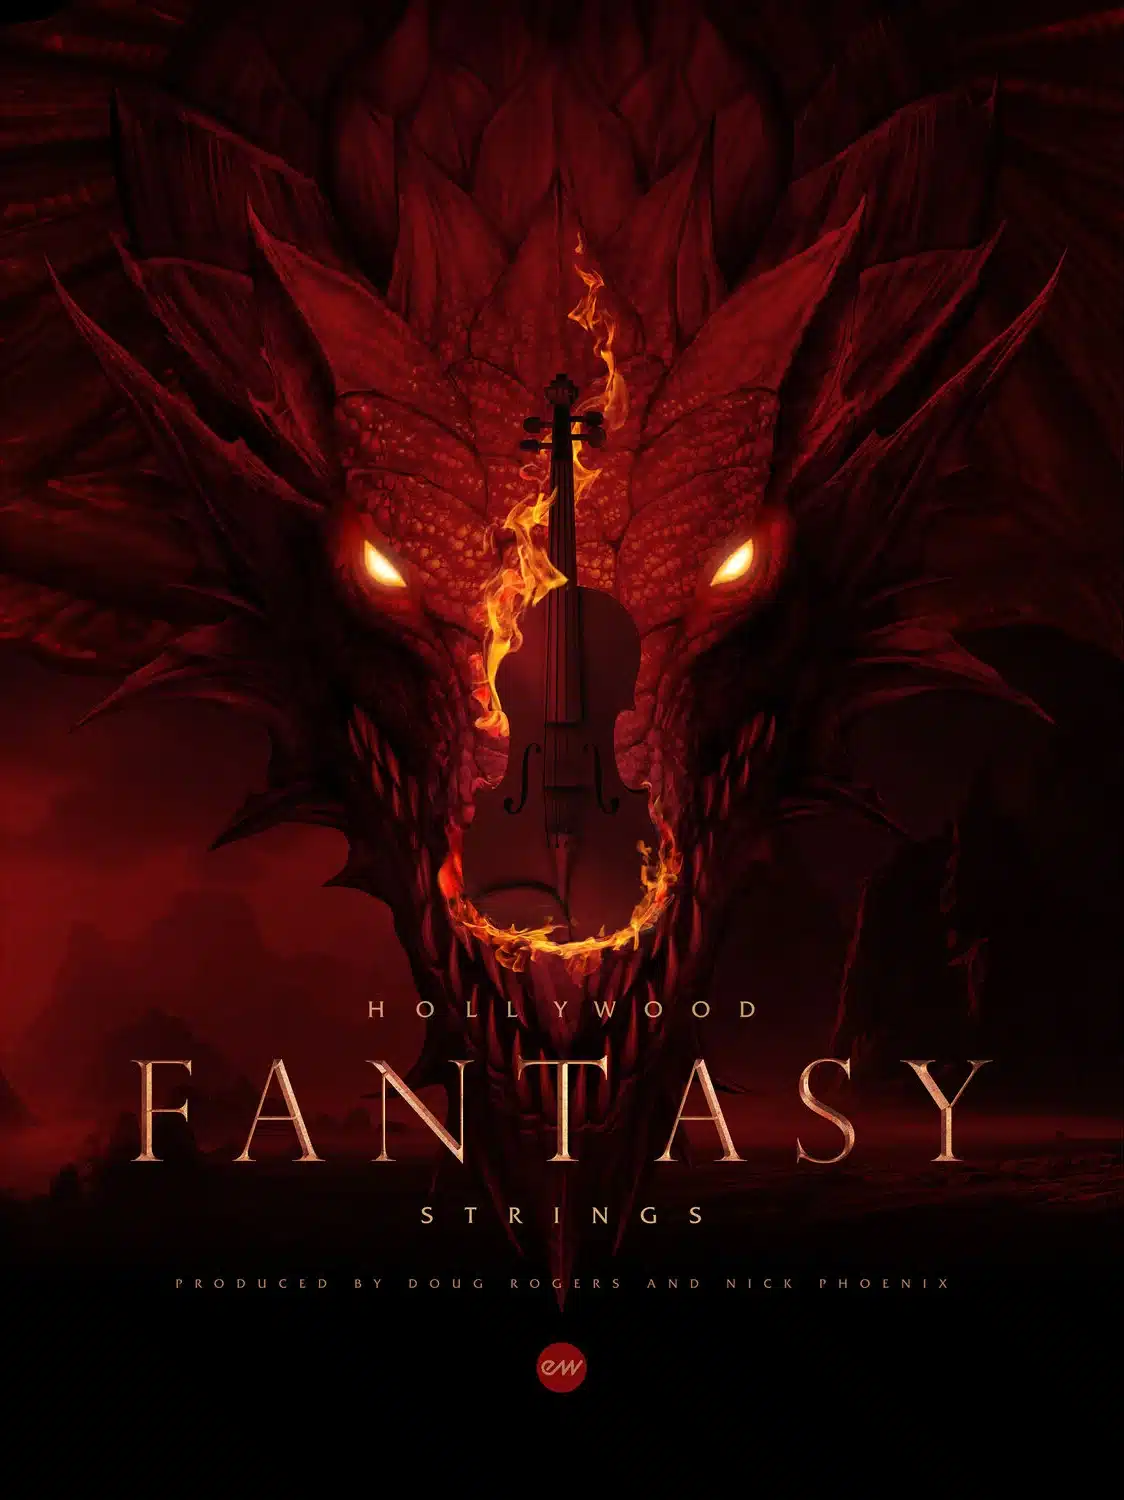 50% off “Hollywood Fantasy Strings” by EastWest